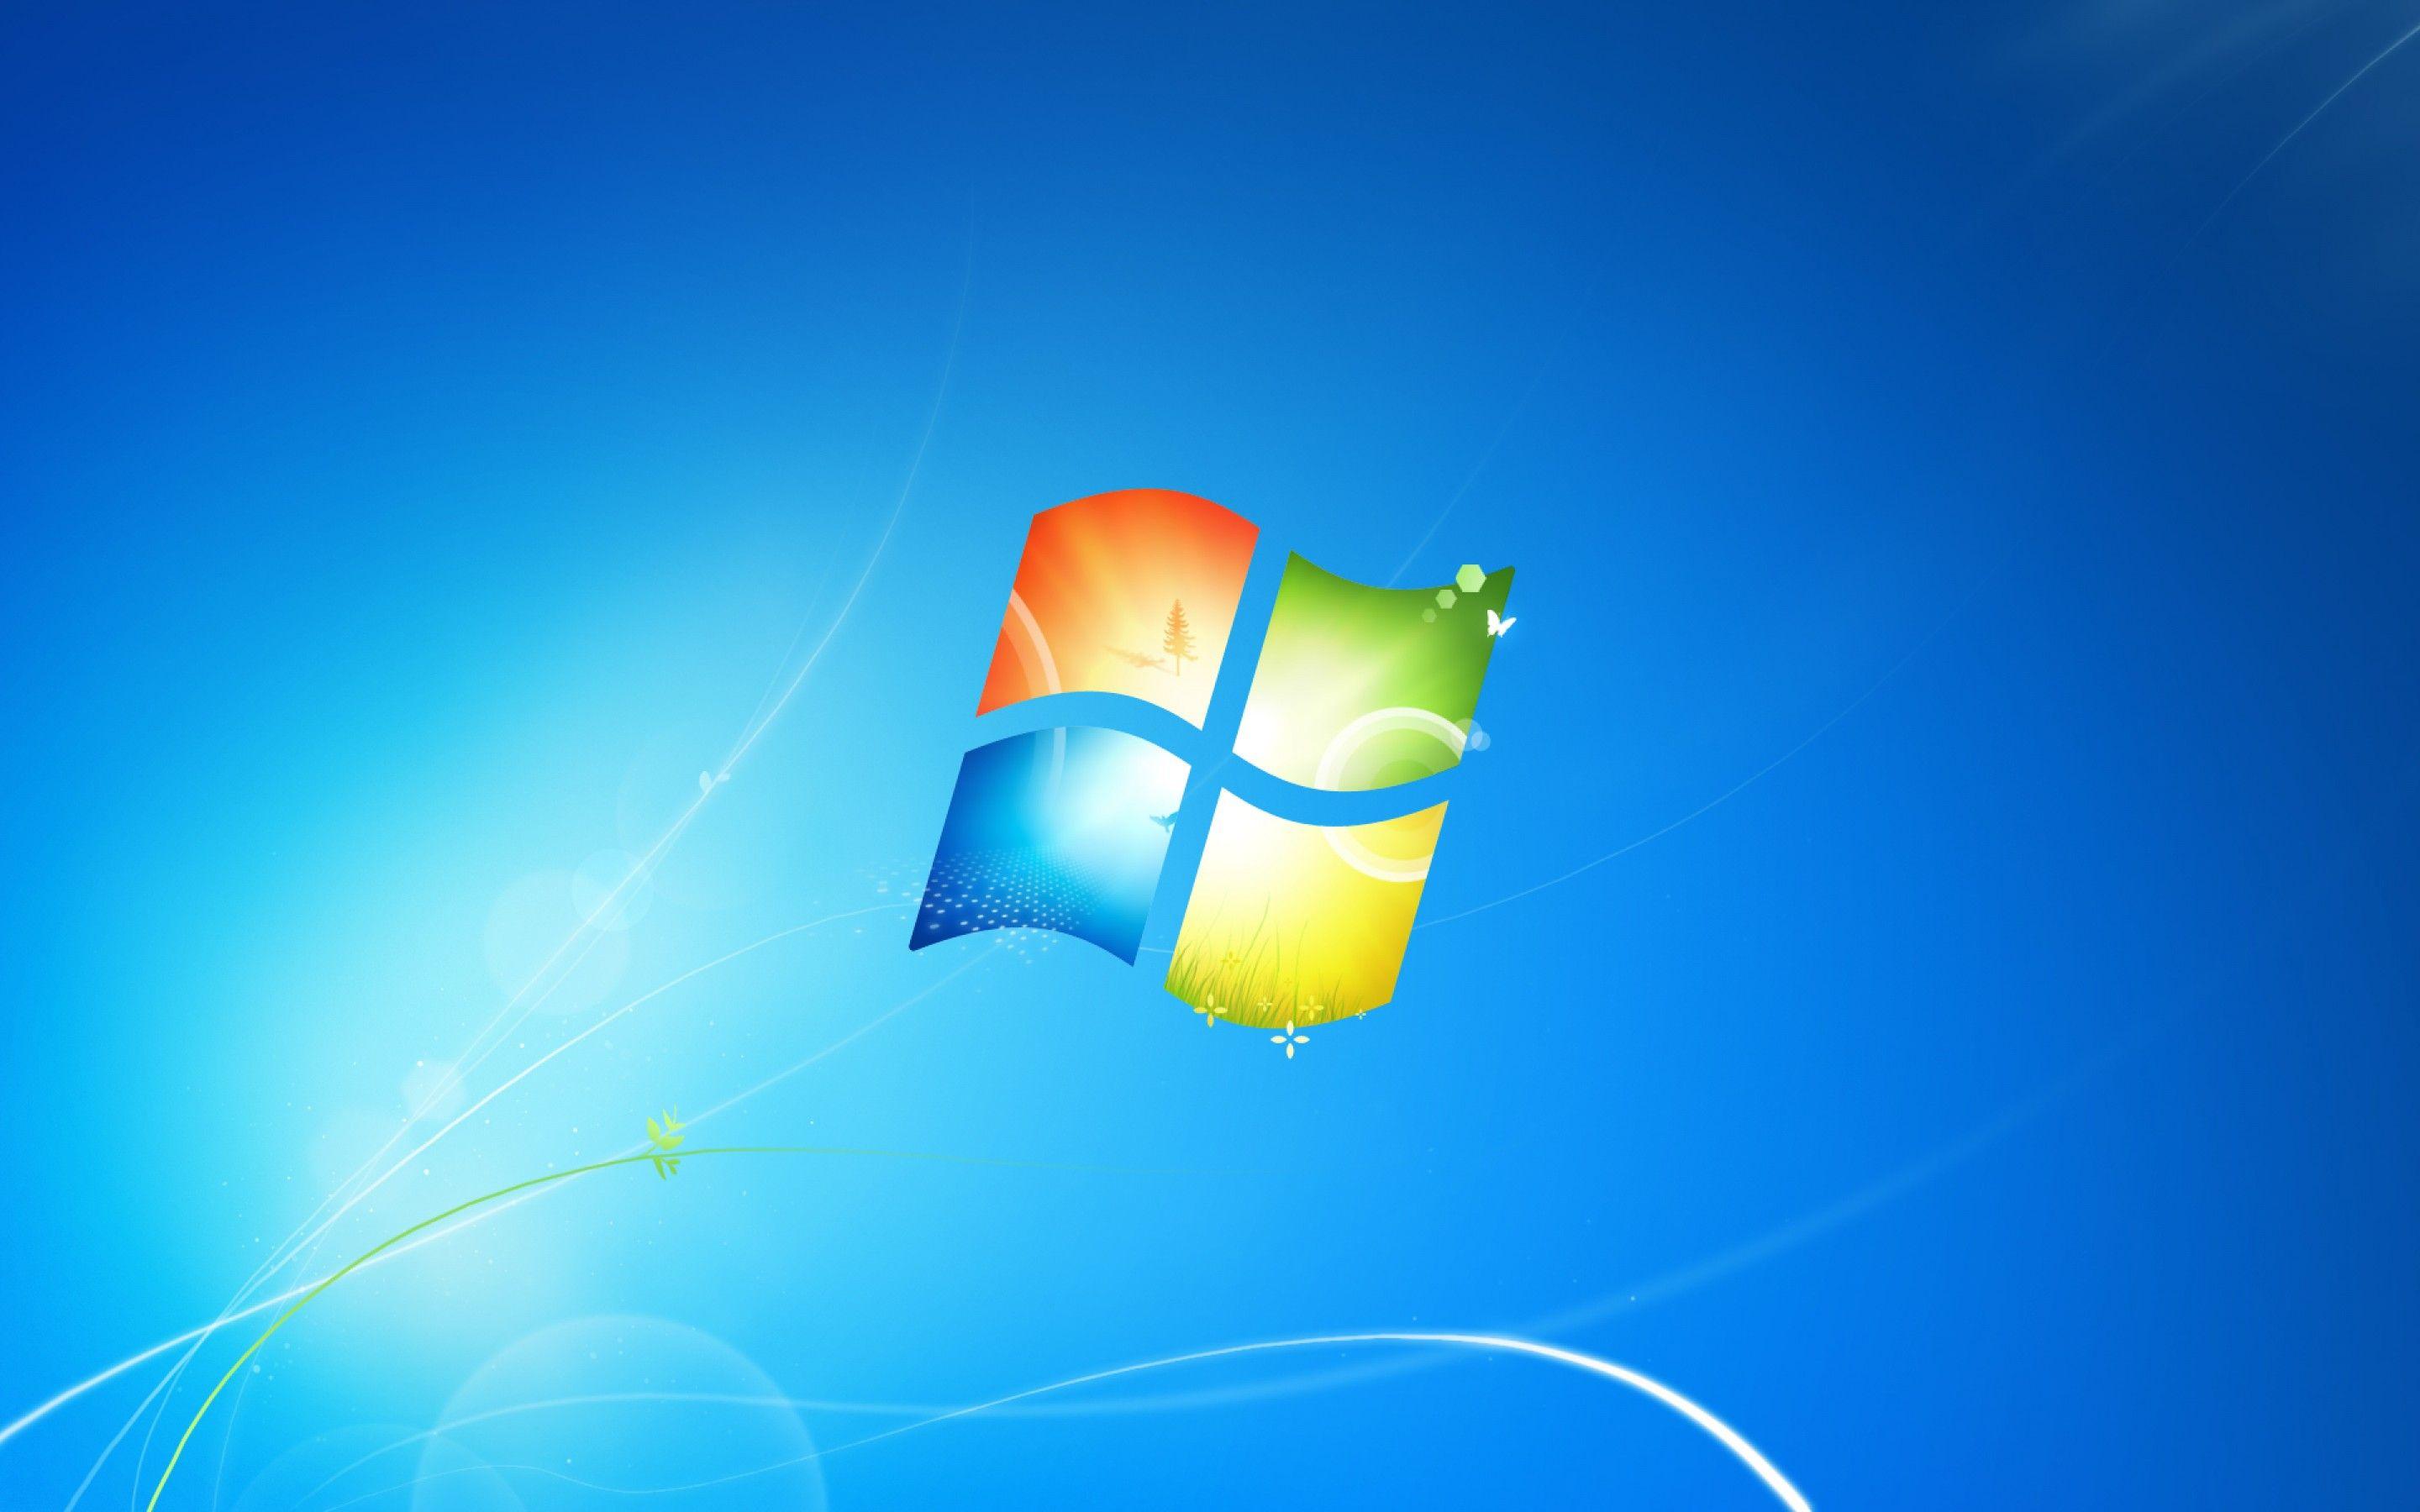 Today I stumbled upon Microsofts 4K rendering of the Windows XP wallpaper   Ars Technica